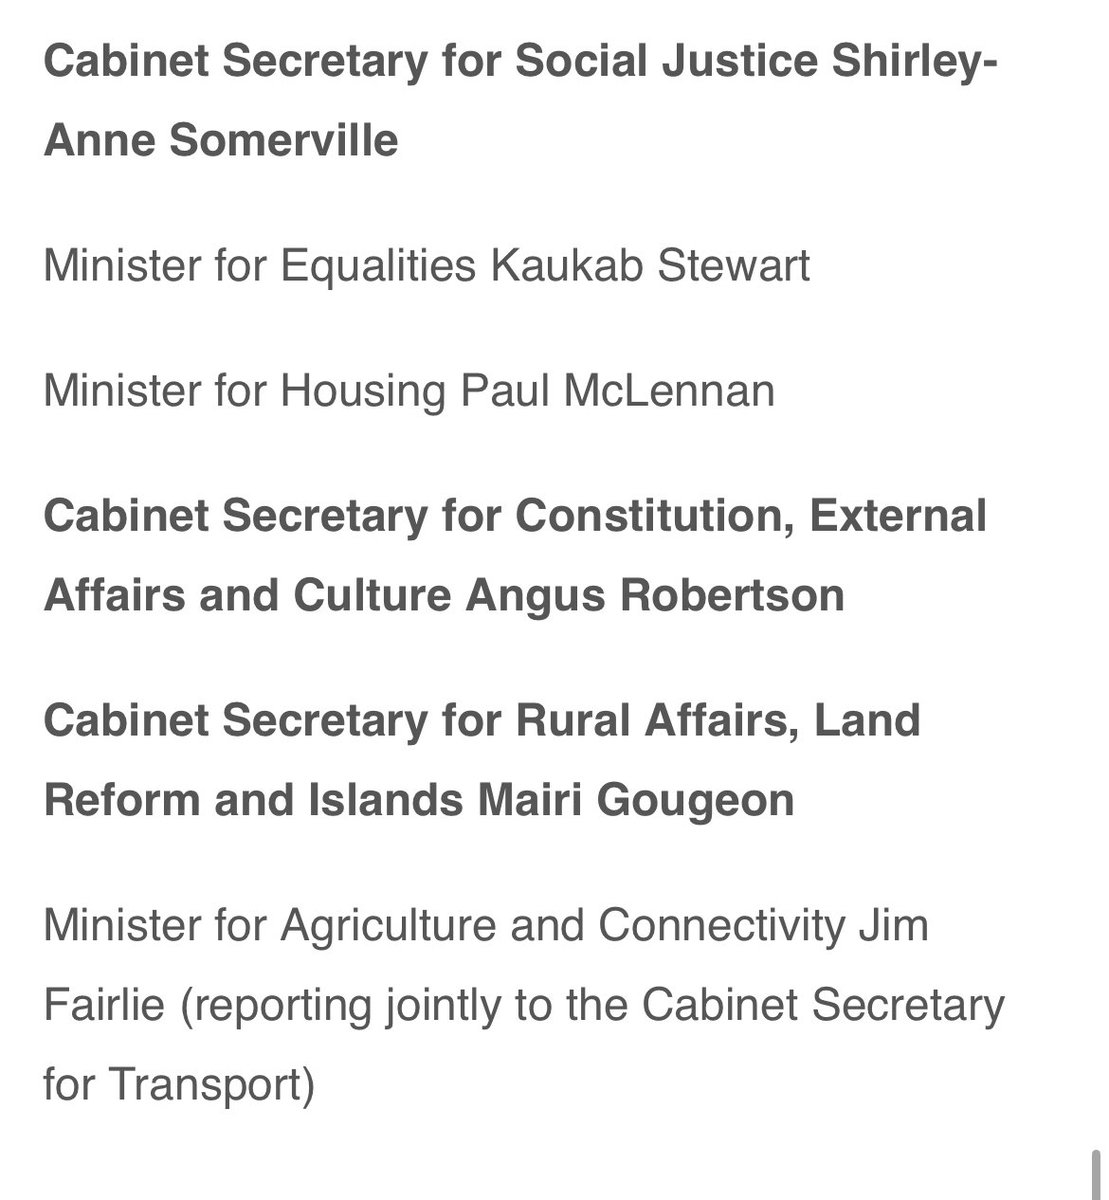 Full Scottish Government announced. There are 4 fewer ministers than there were at the start of the year. Notably, there is no place for a Minister for Independence in John Swinney’s team. @itvnews